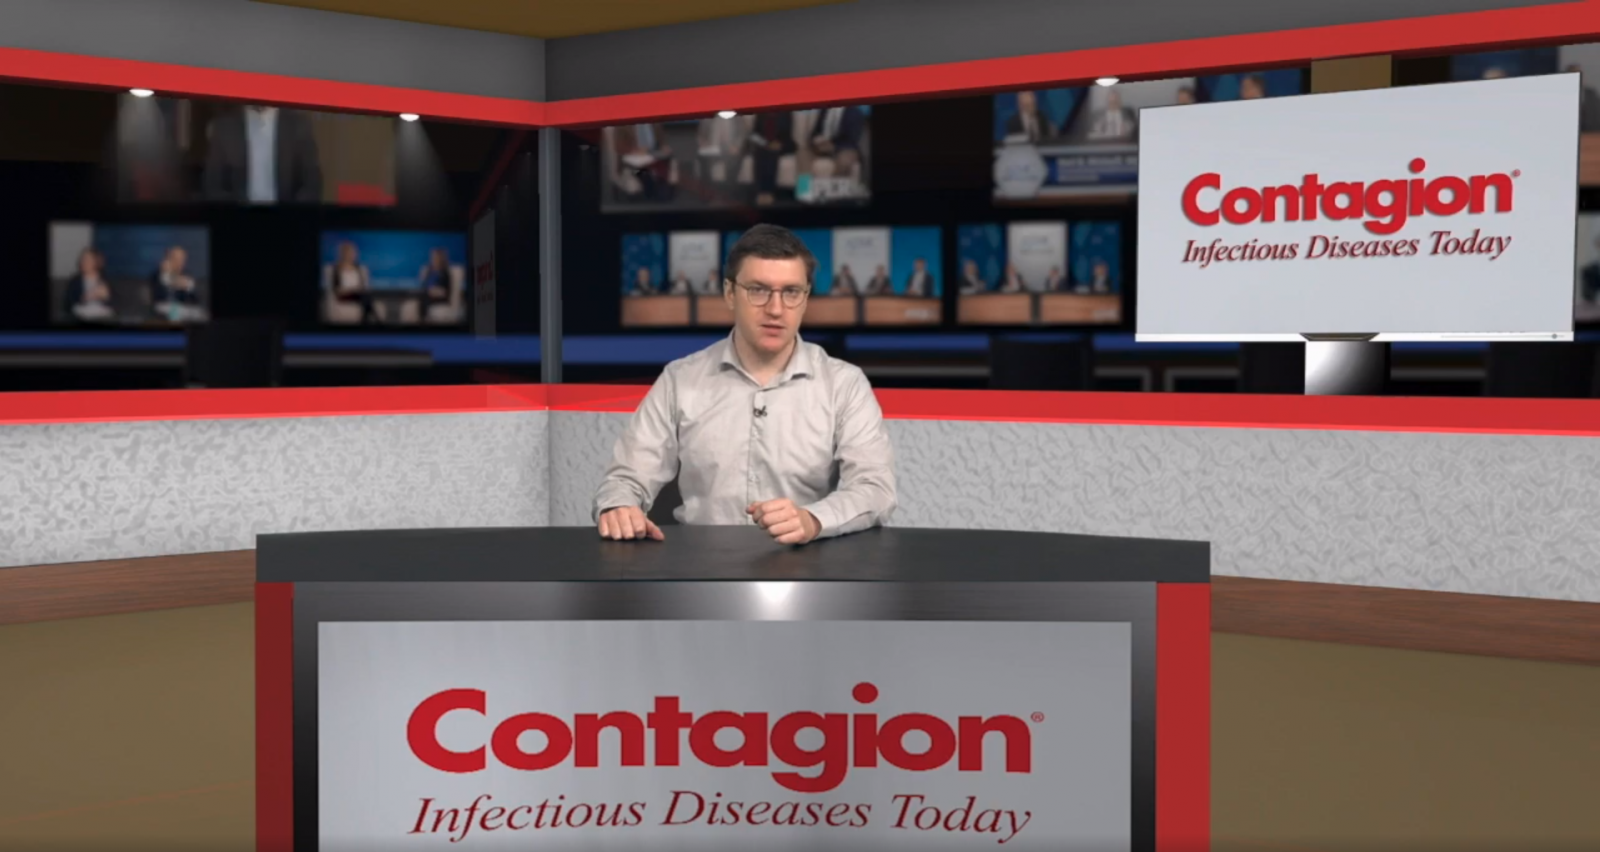 Contagion Live News Network: Coronavirus Updates for March 11, 2020